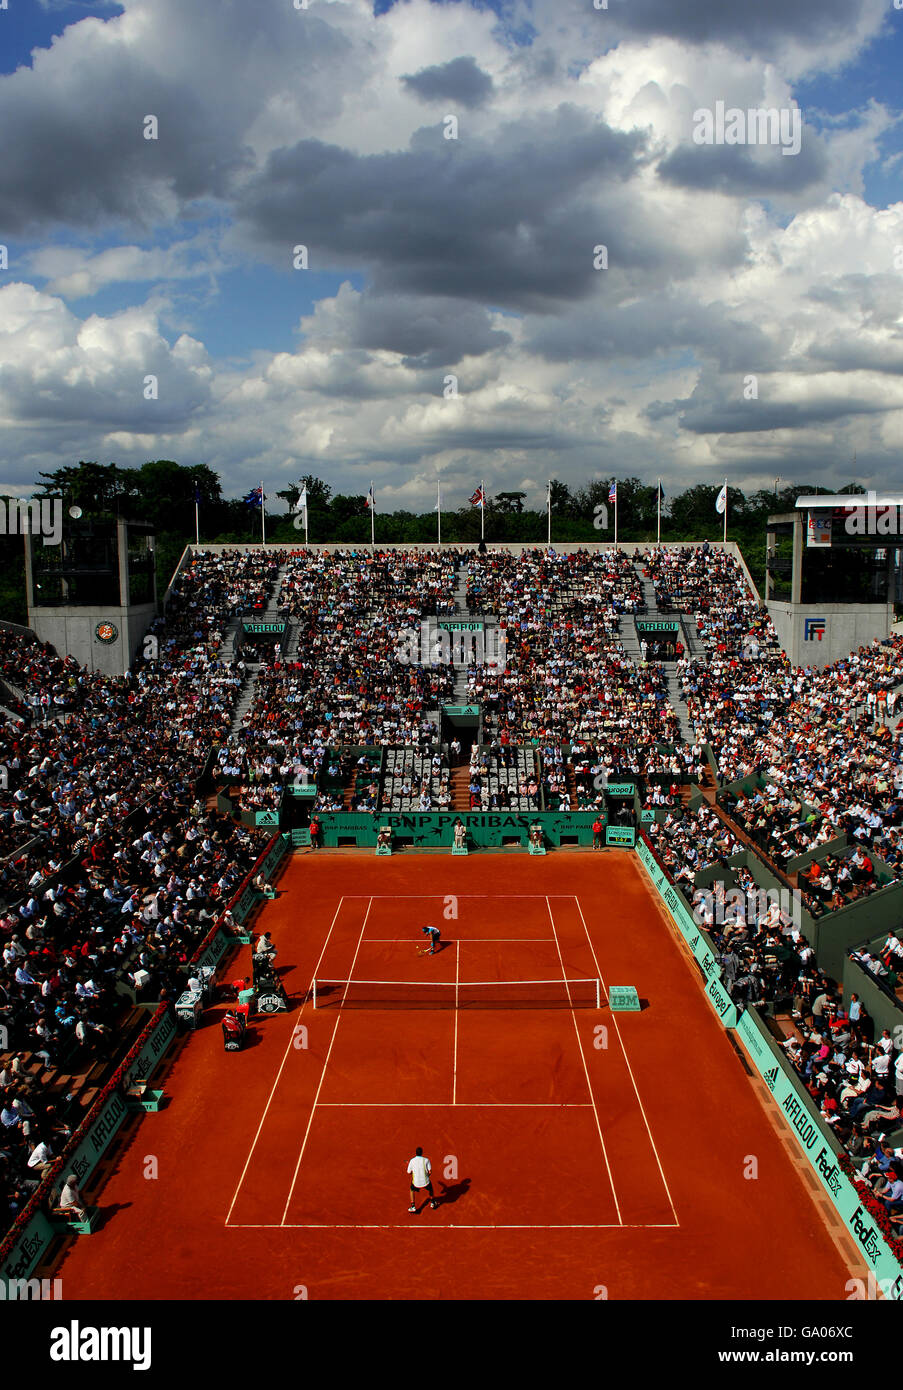 General view of Court Suzanne Lenglen as Flavio Cipolla of Italy faces Rafael Nadal of Spain in the second round of the French Open Stock Photo